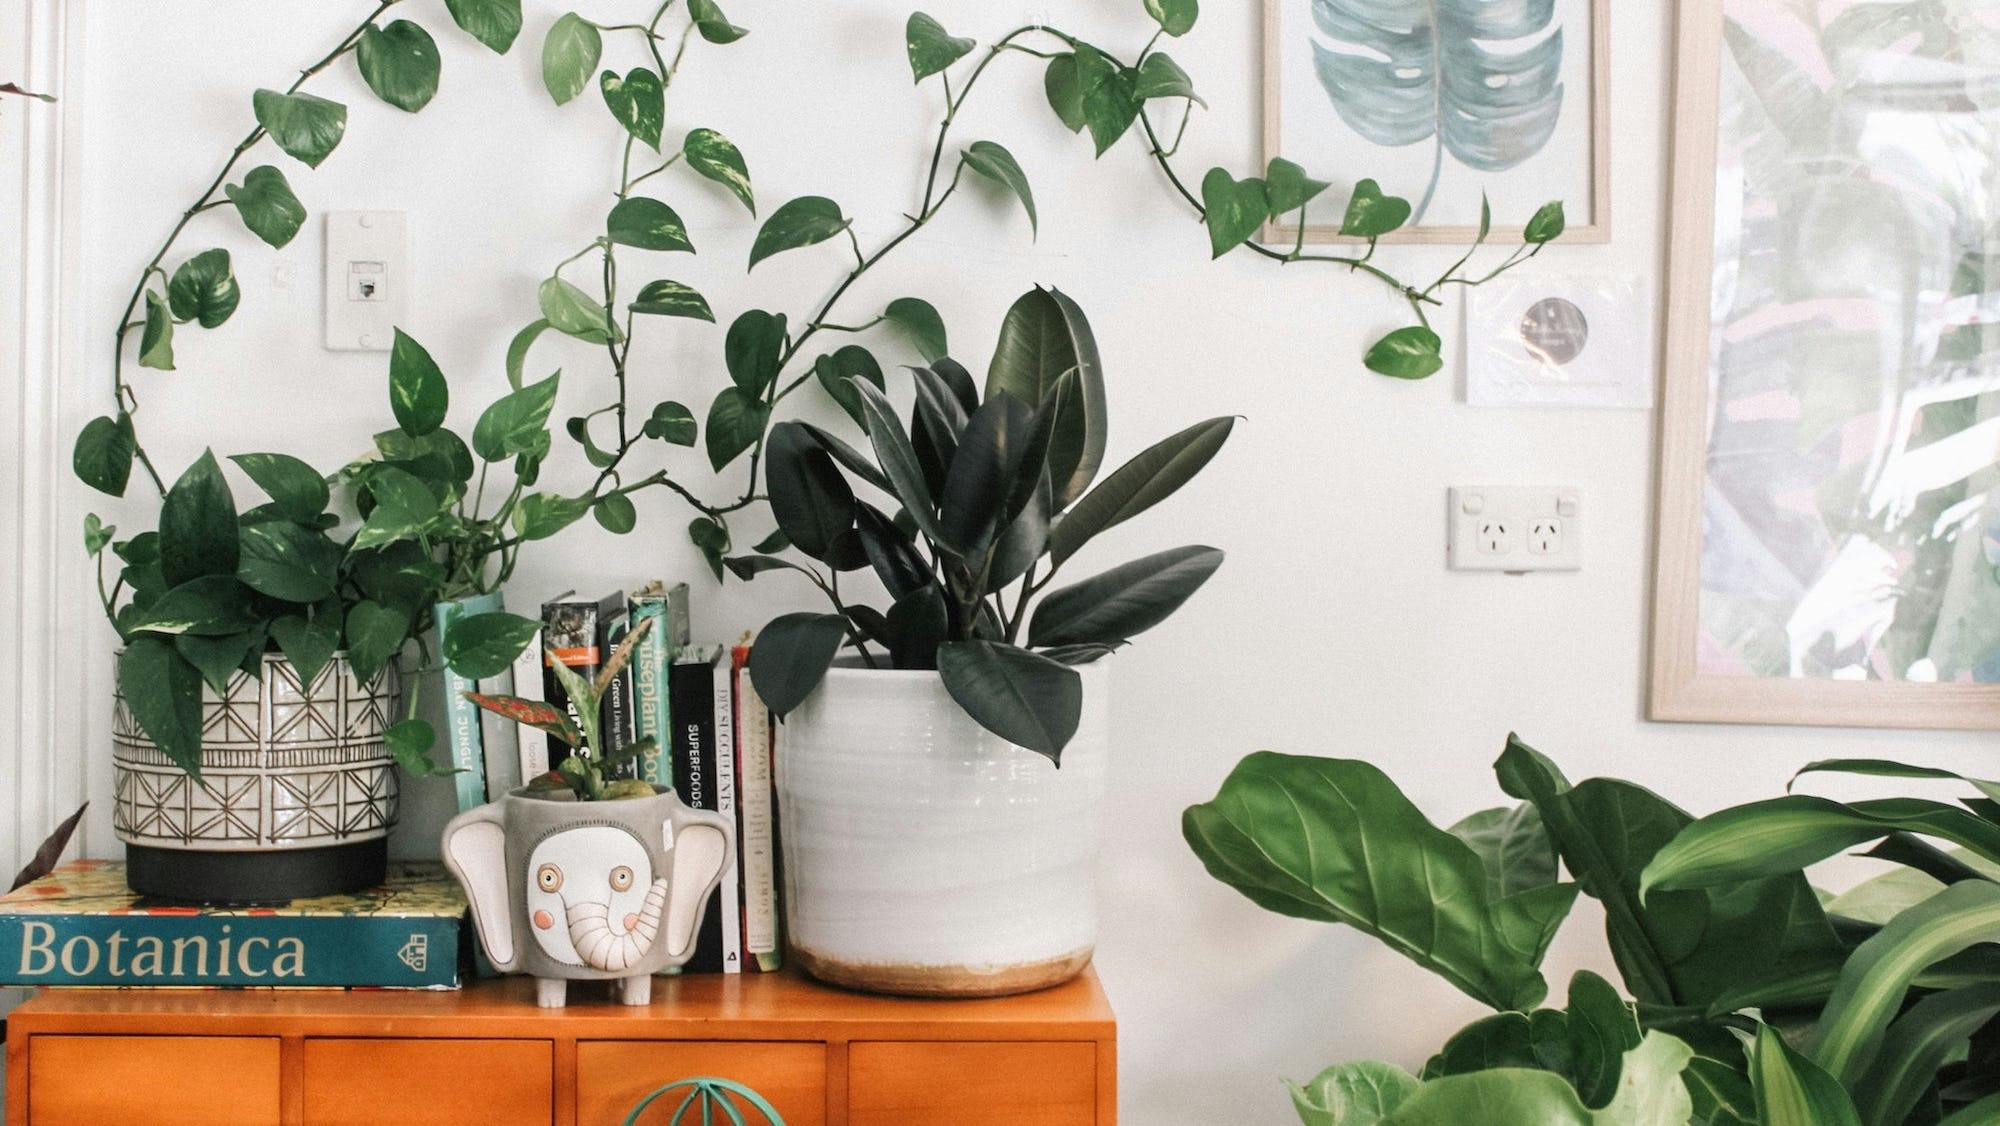 A rental home filled with plants on and around a shelf